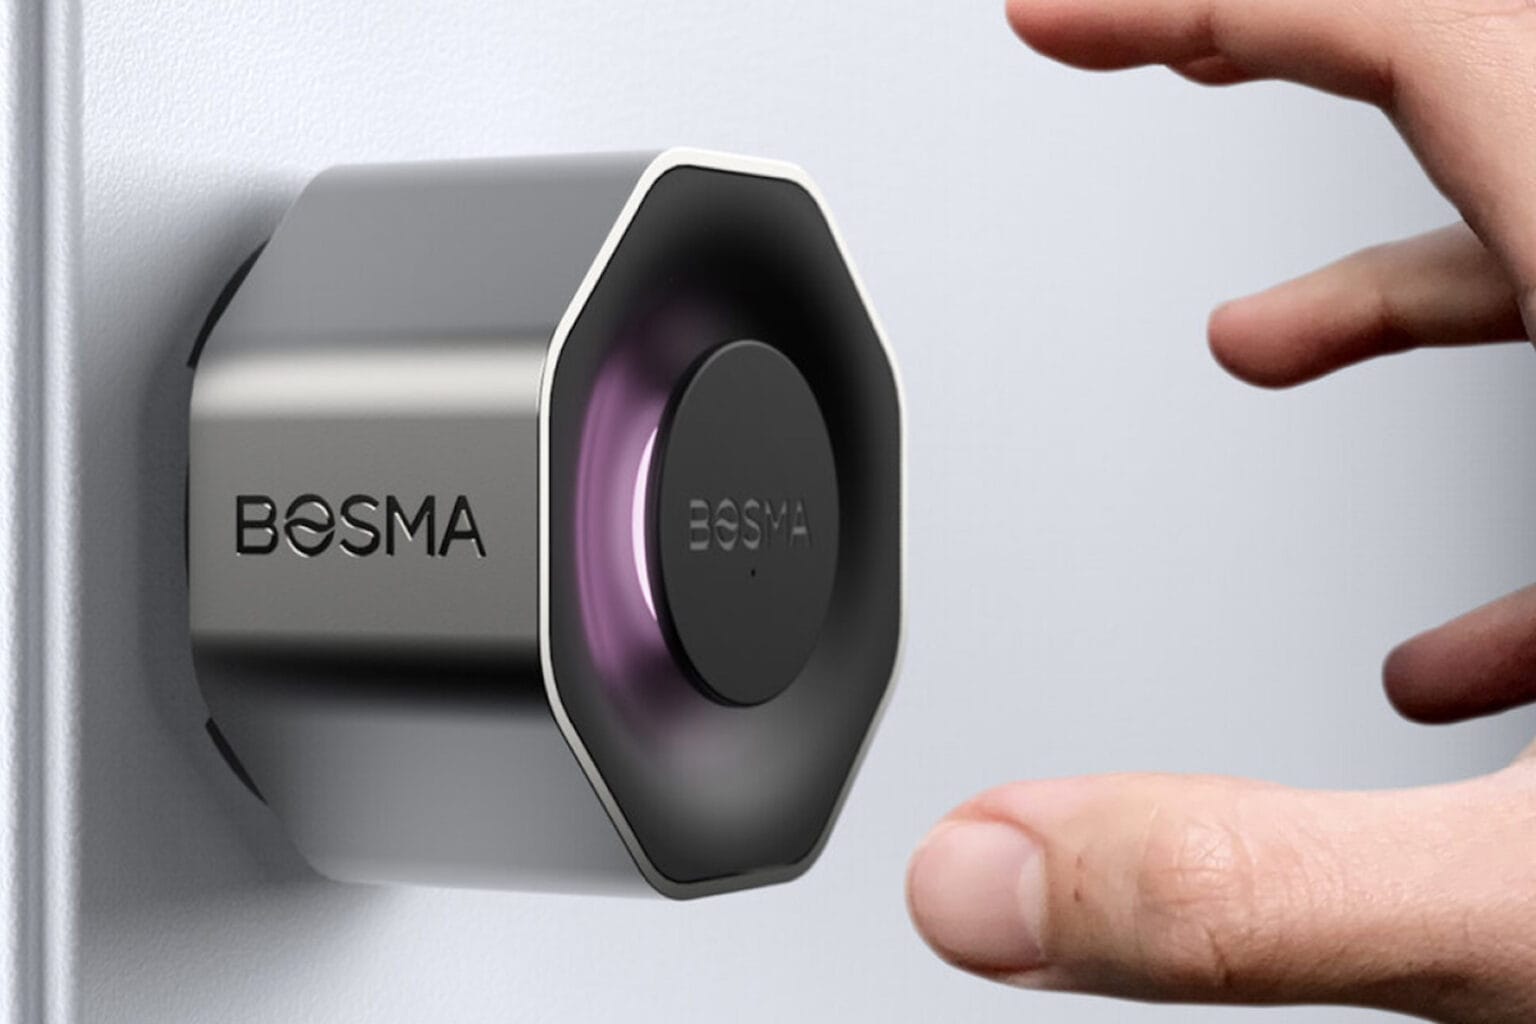 Check your door from your iPhone with this smart lock.